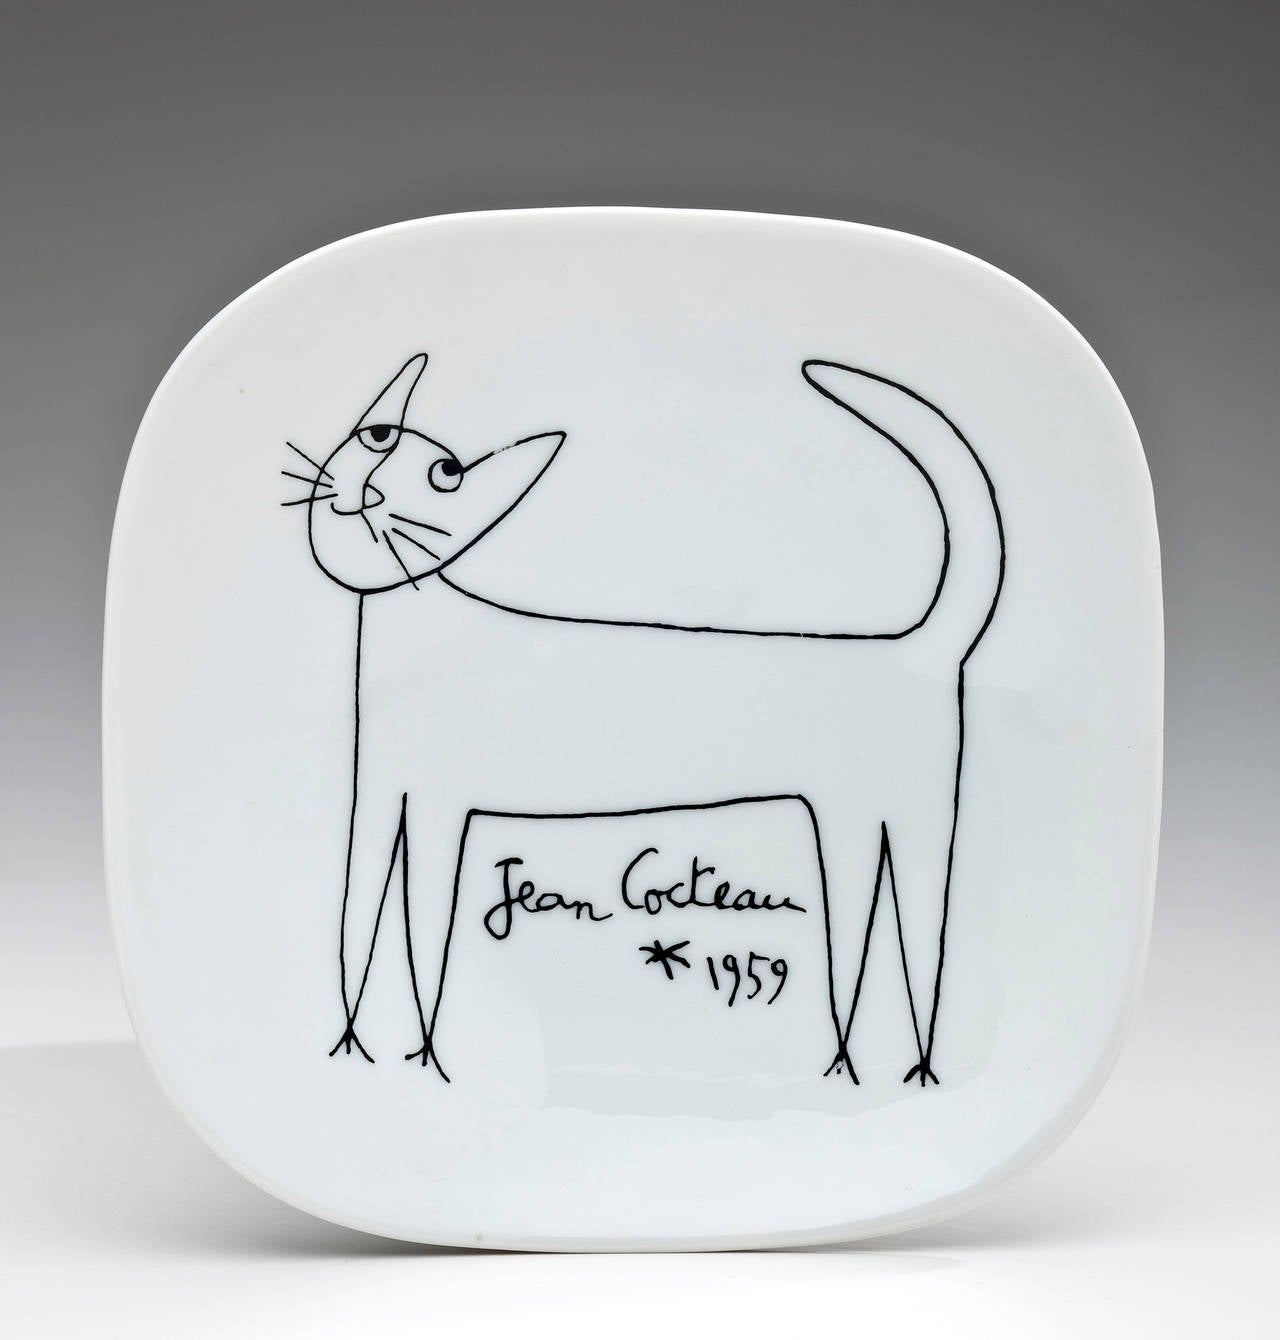 A white glazed ceramic plate with the drawing of a cat by Surrealist artist Jean Cocteau. The plate, designed by Cocteau, was produced by Limoges Signed and dated by Cocteau, as well as Limoges.